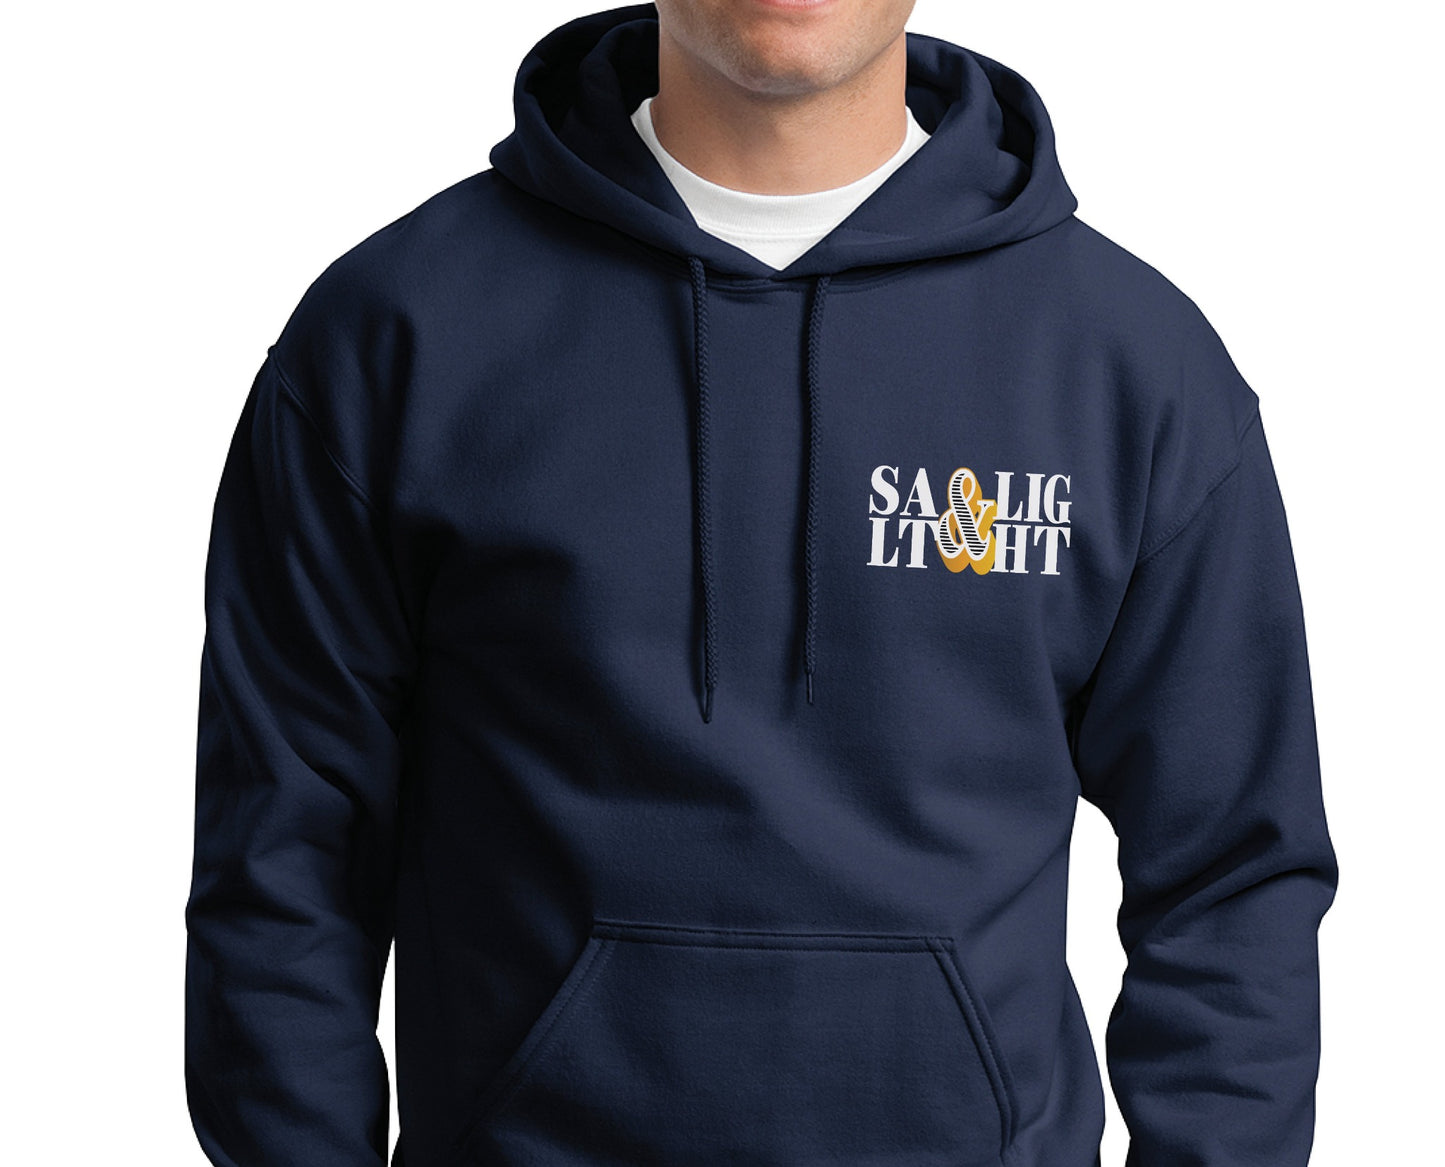 Retro Stacked Salt And Light Matthew 5 Christian bible verse design printed on front and back in white and gold on navy blue cozy unisex hoodie for men and women